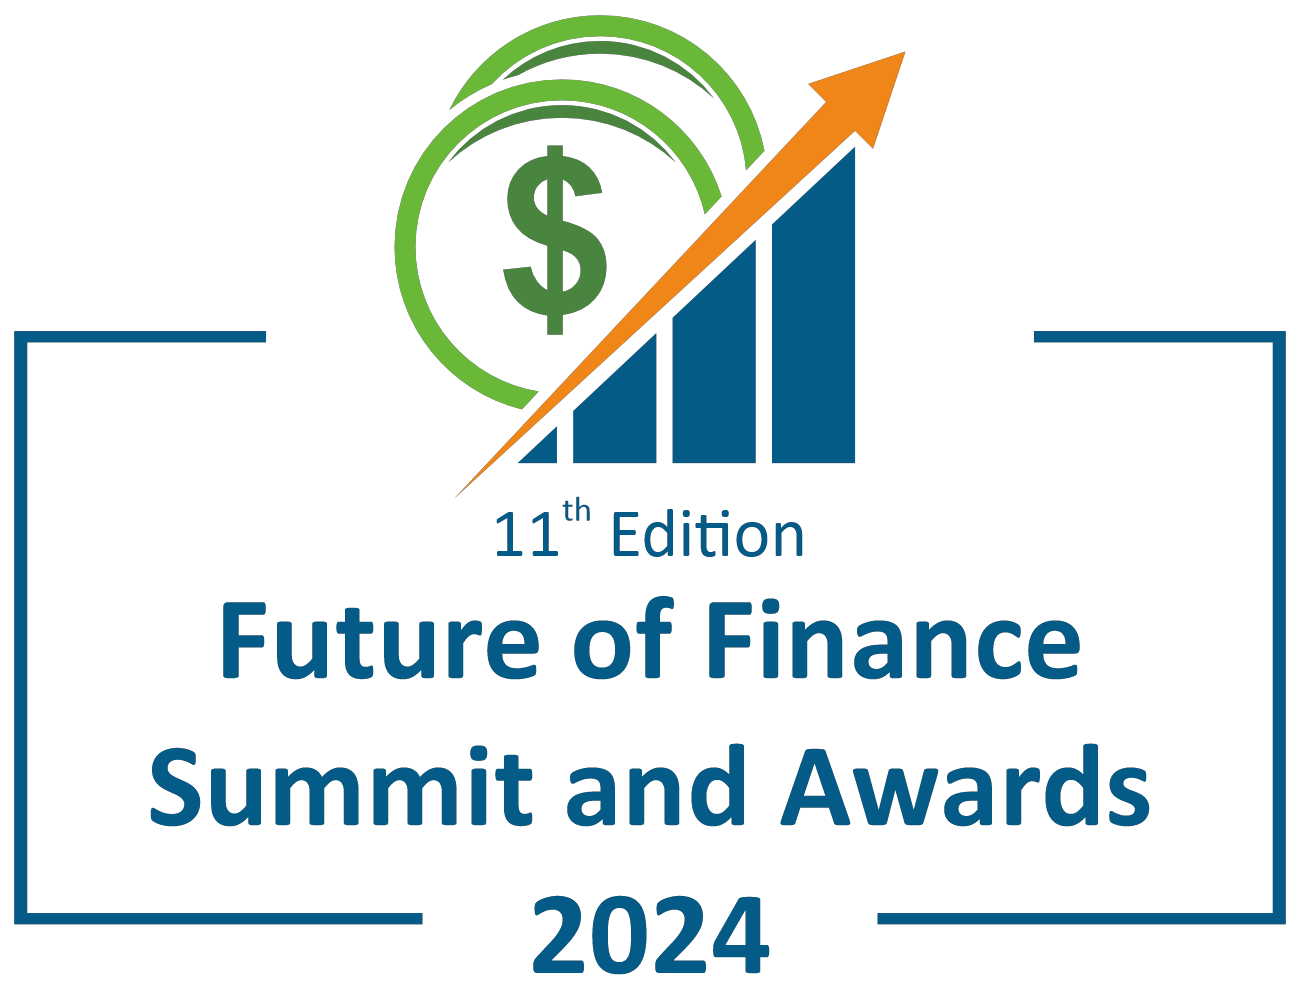 11th Edition Future of Finance Summit and Awards 2024